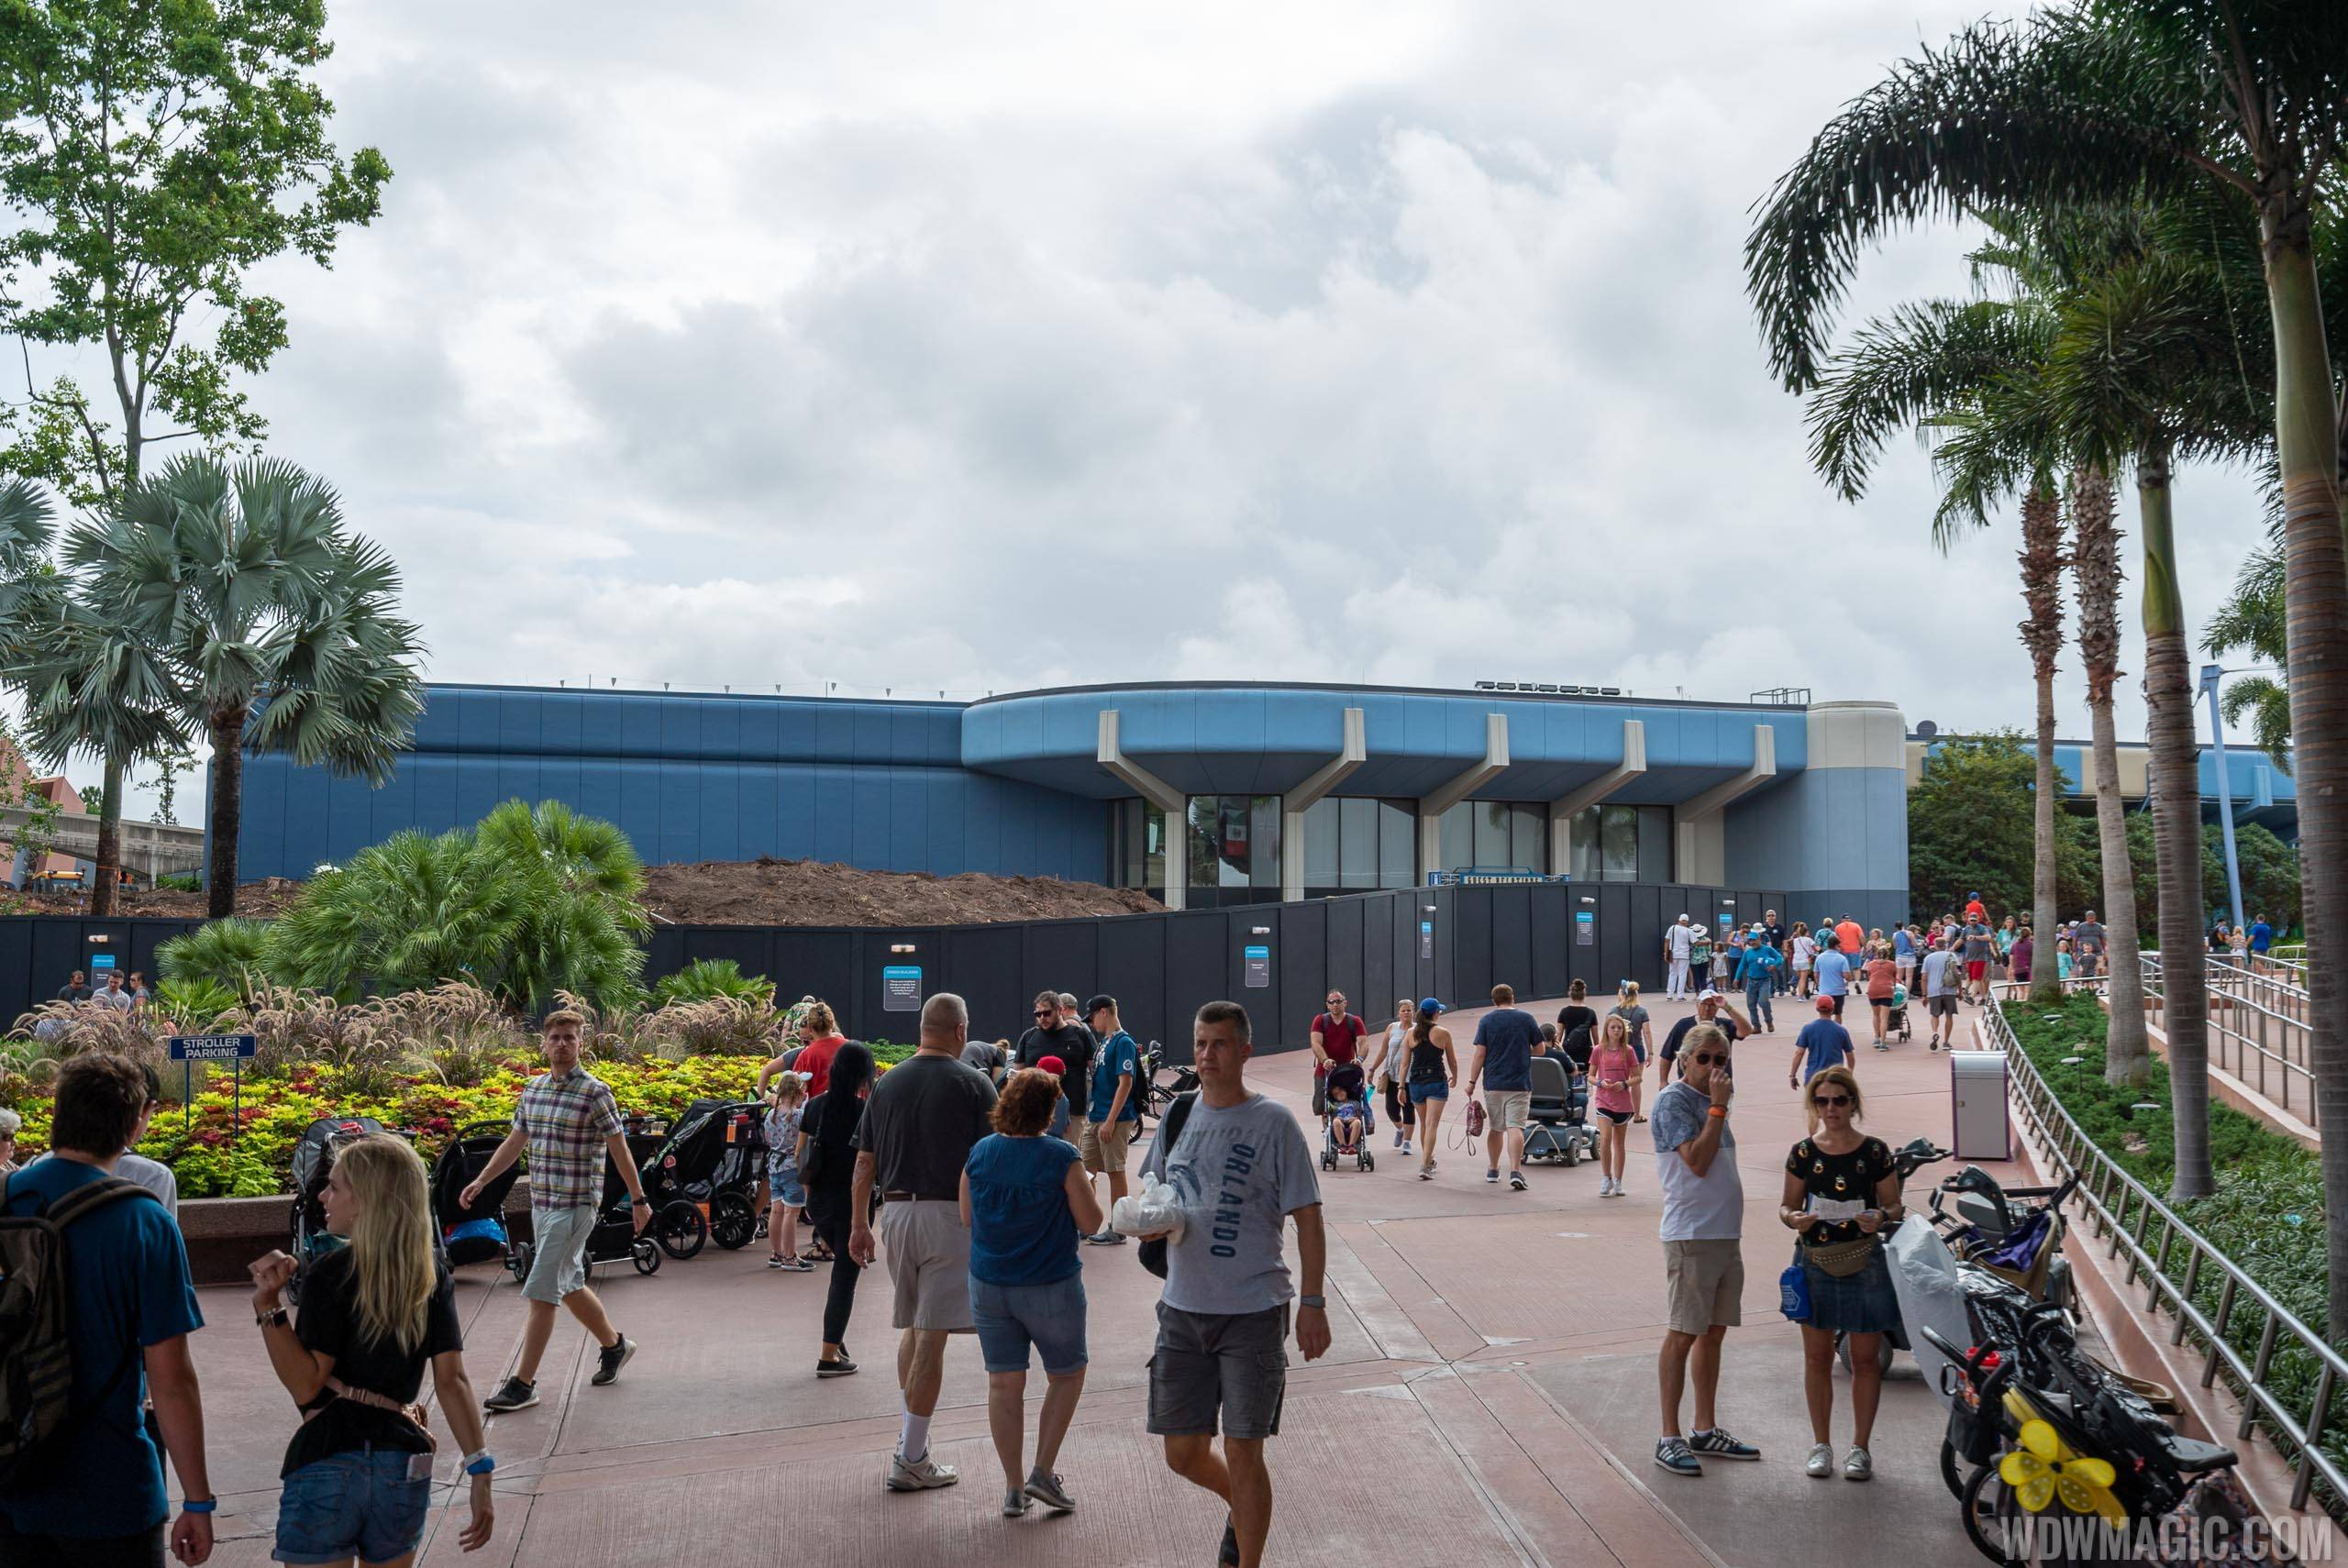 Epcot central area construction October 2019 - Between Guardians of the Galaxy and Innoventions East